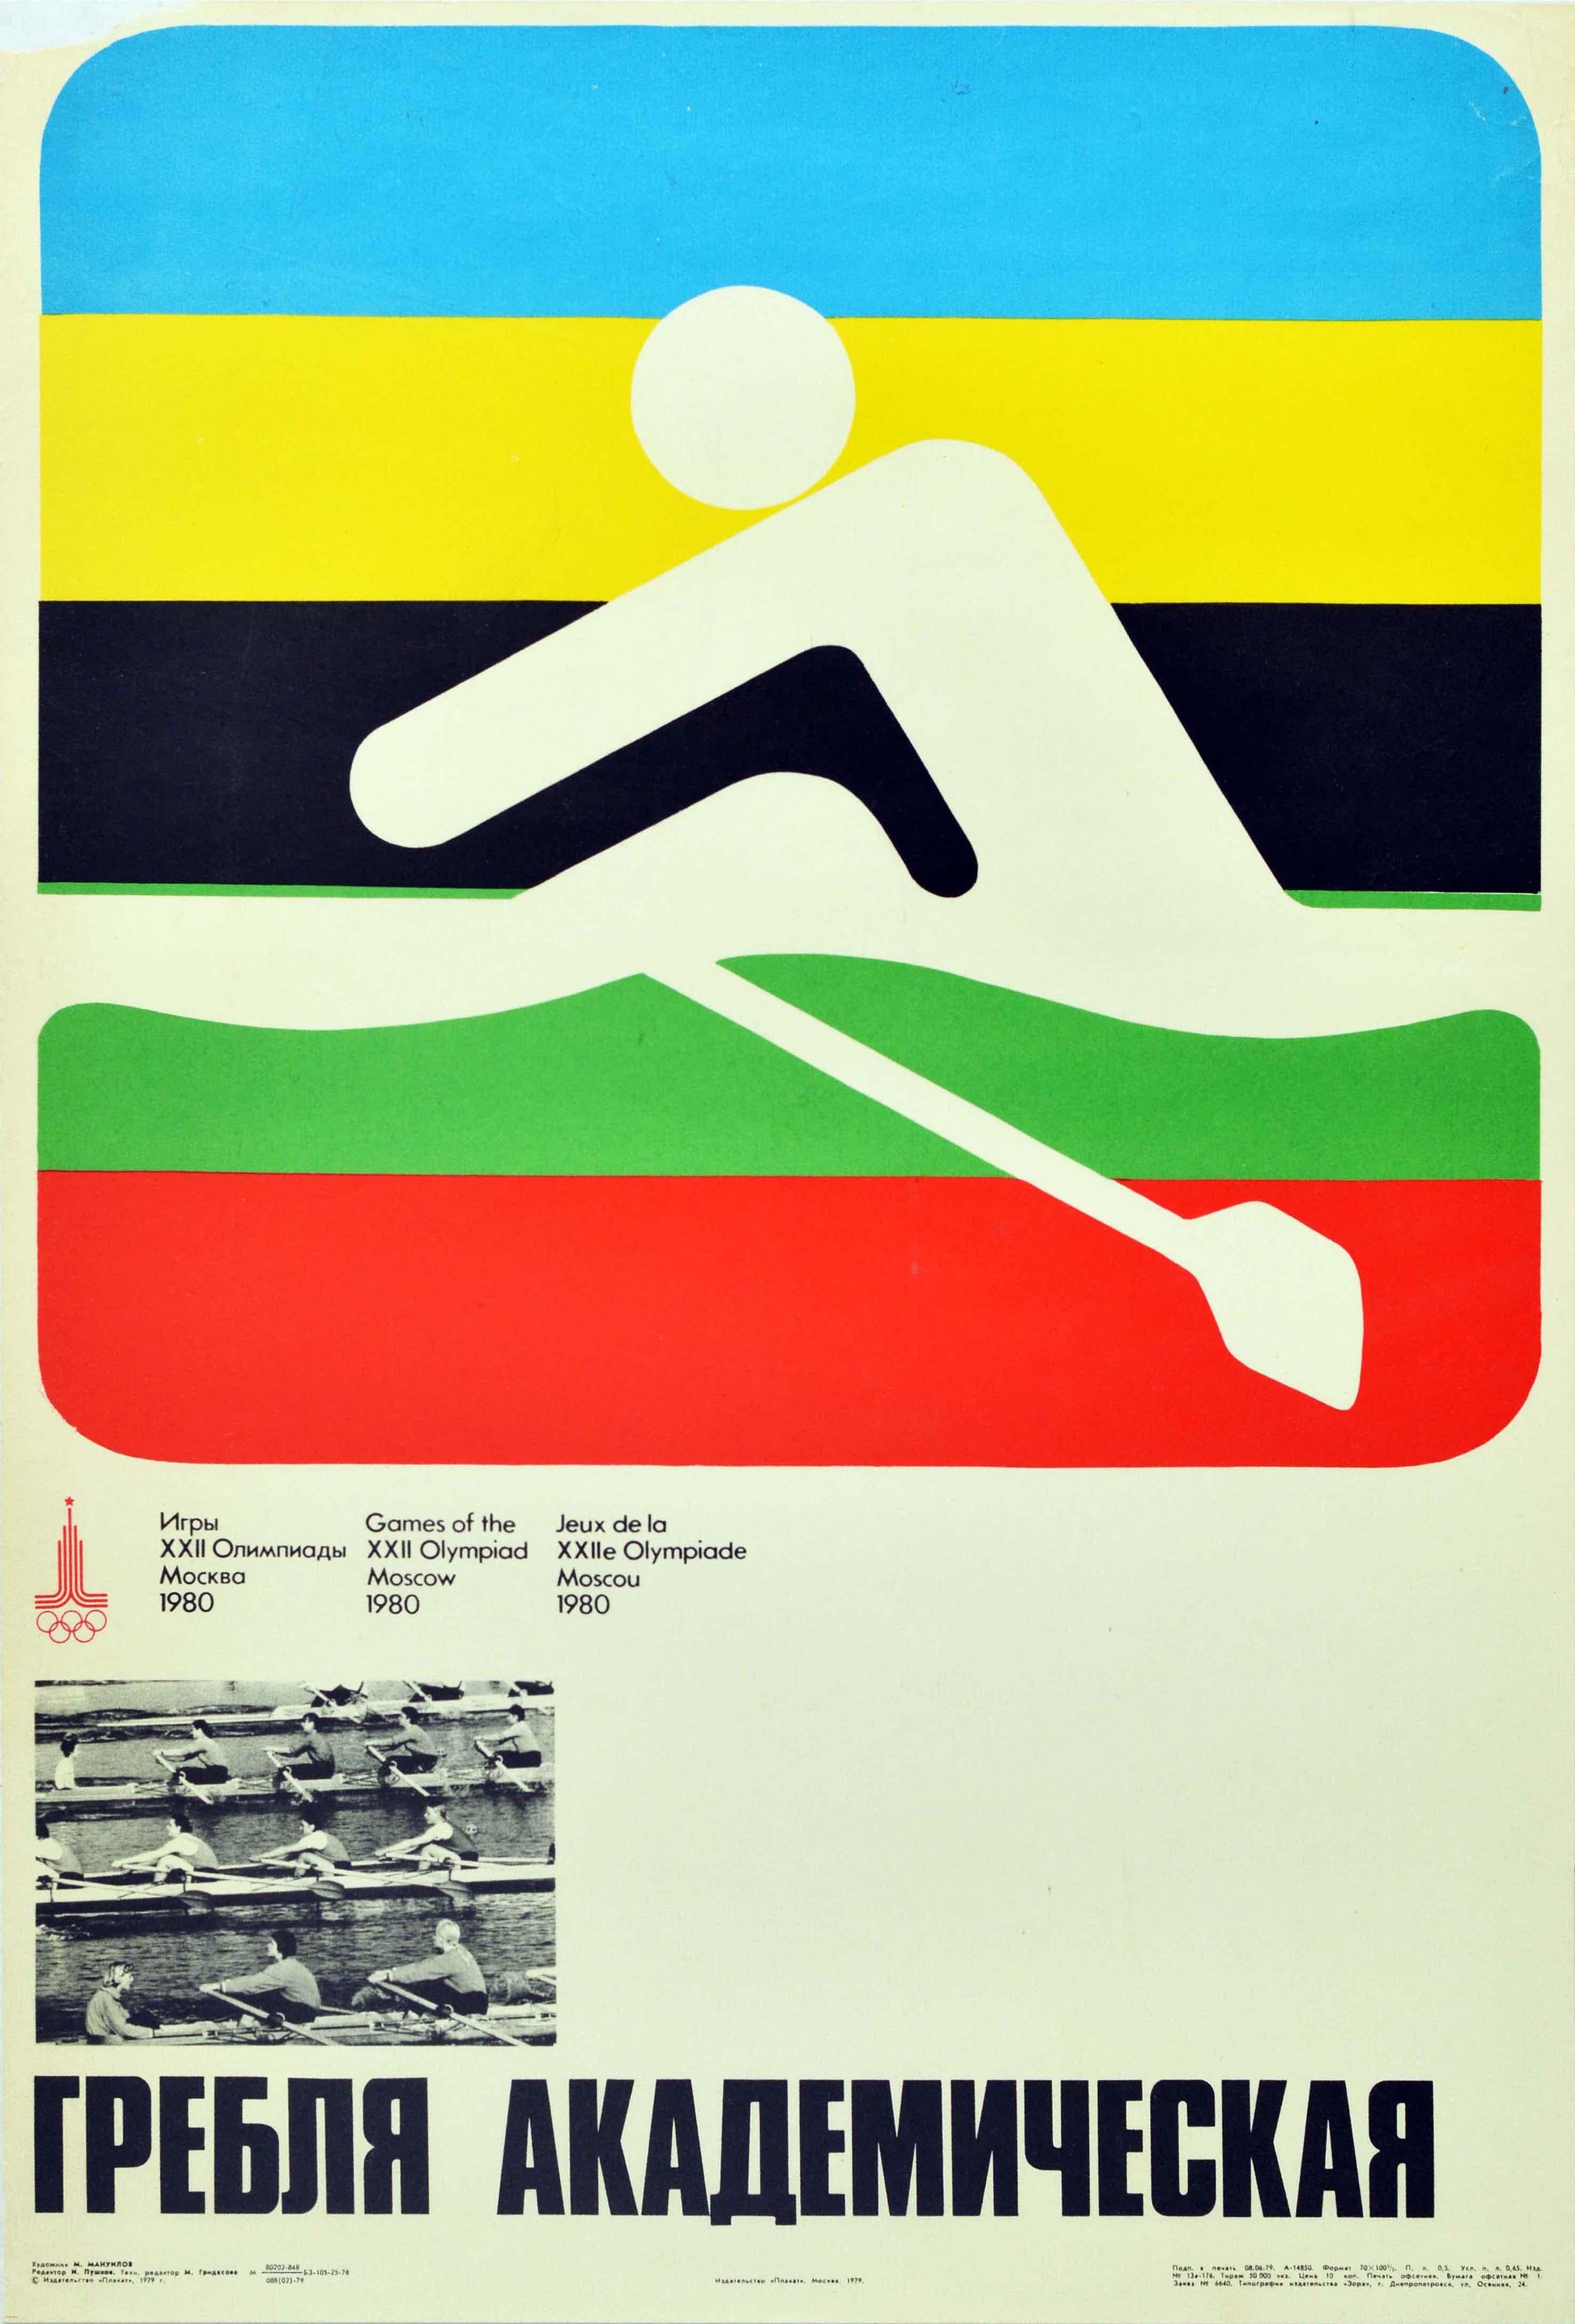 M Manuilov Print - Original Vintage Sport Poster Moscow Olympics 1980 Pictogram Rowing Race Photo